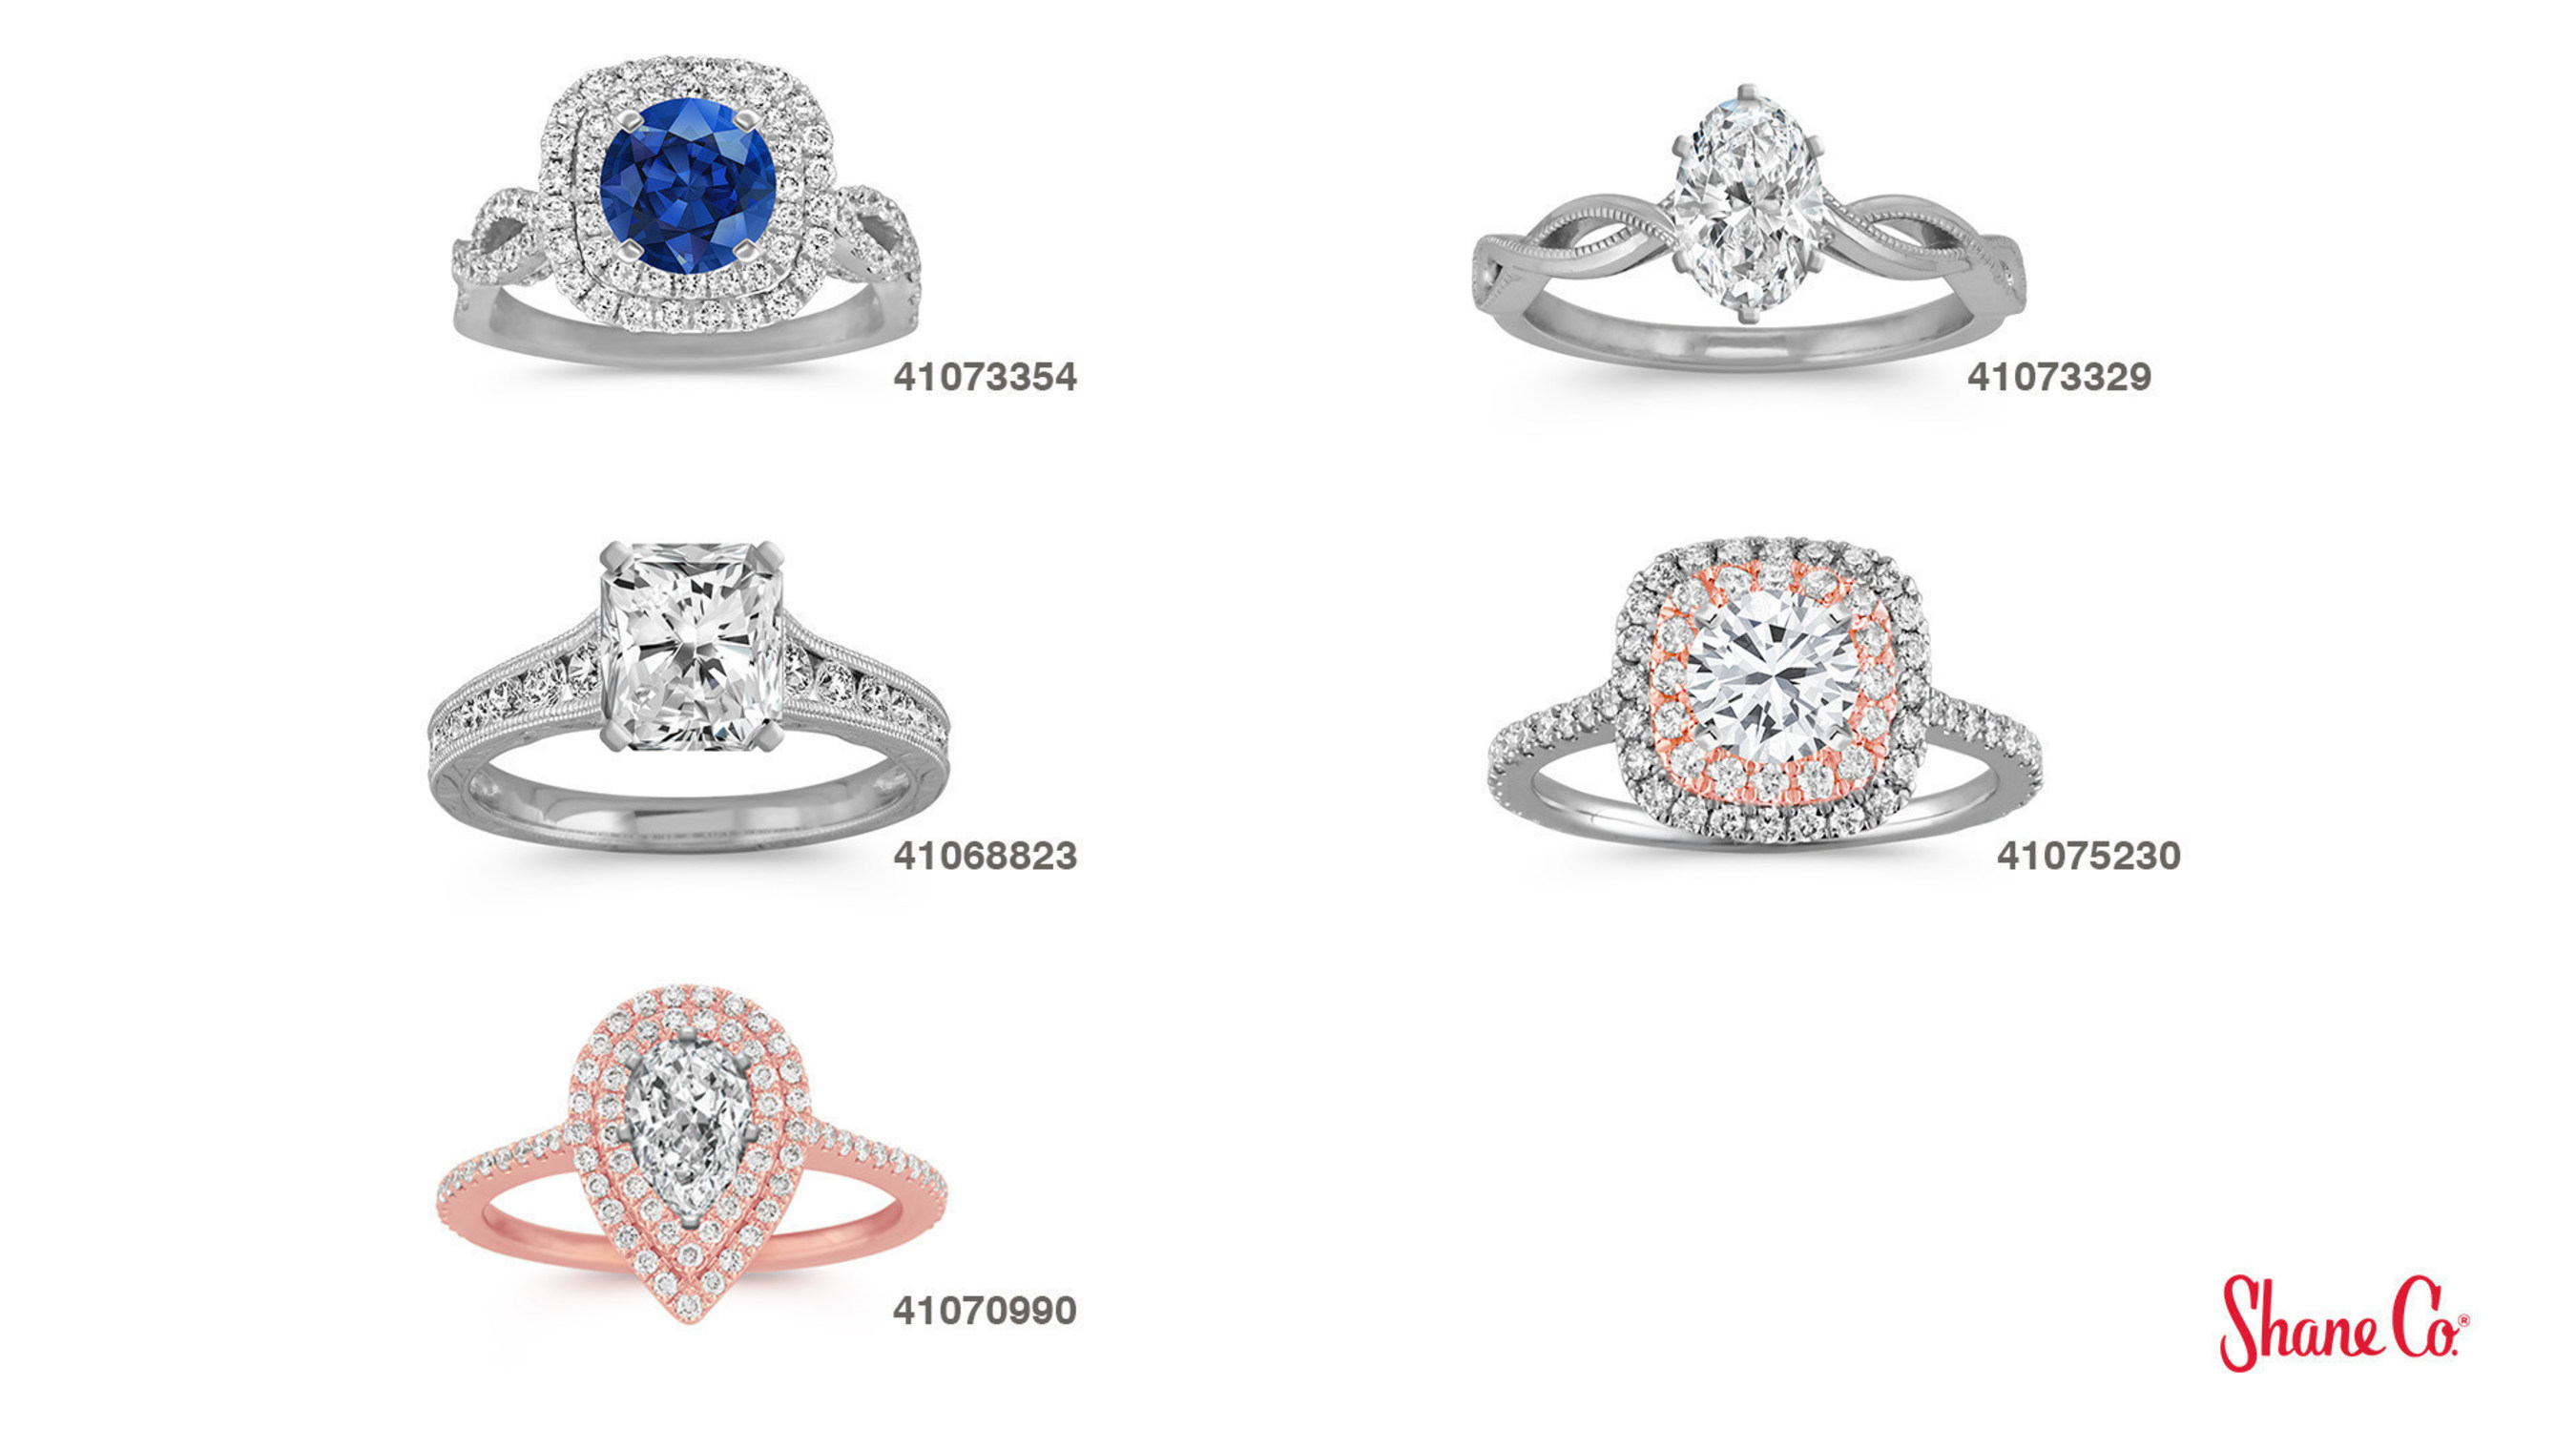 Shane Co.'s Top Five Engagement Rings for Fall